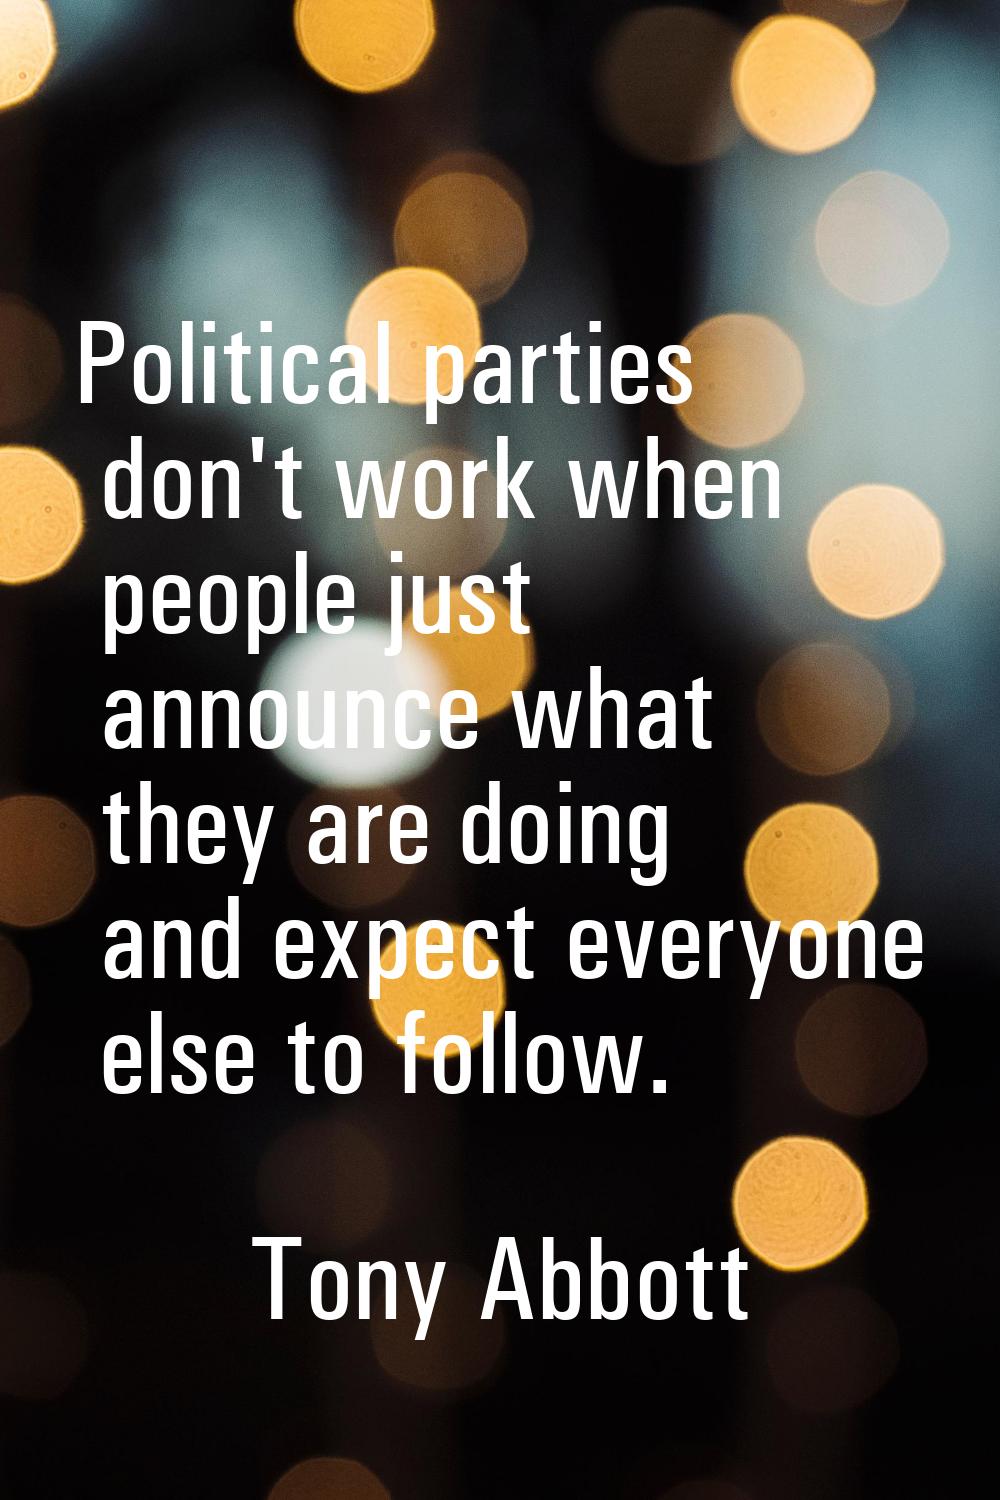 Political parties don't work when people just announce what they are doing and expect everyone else